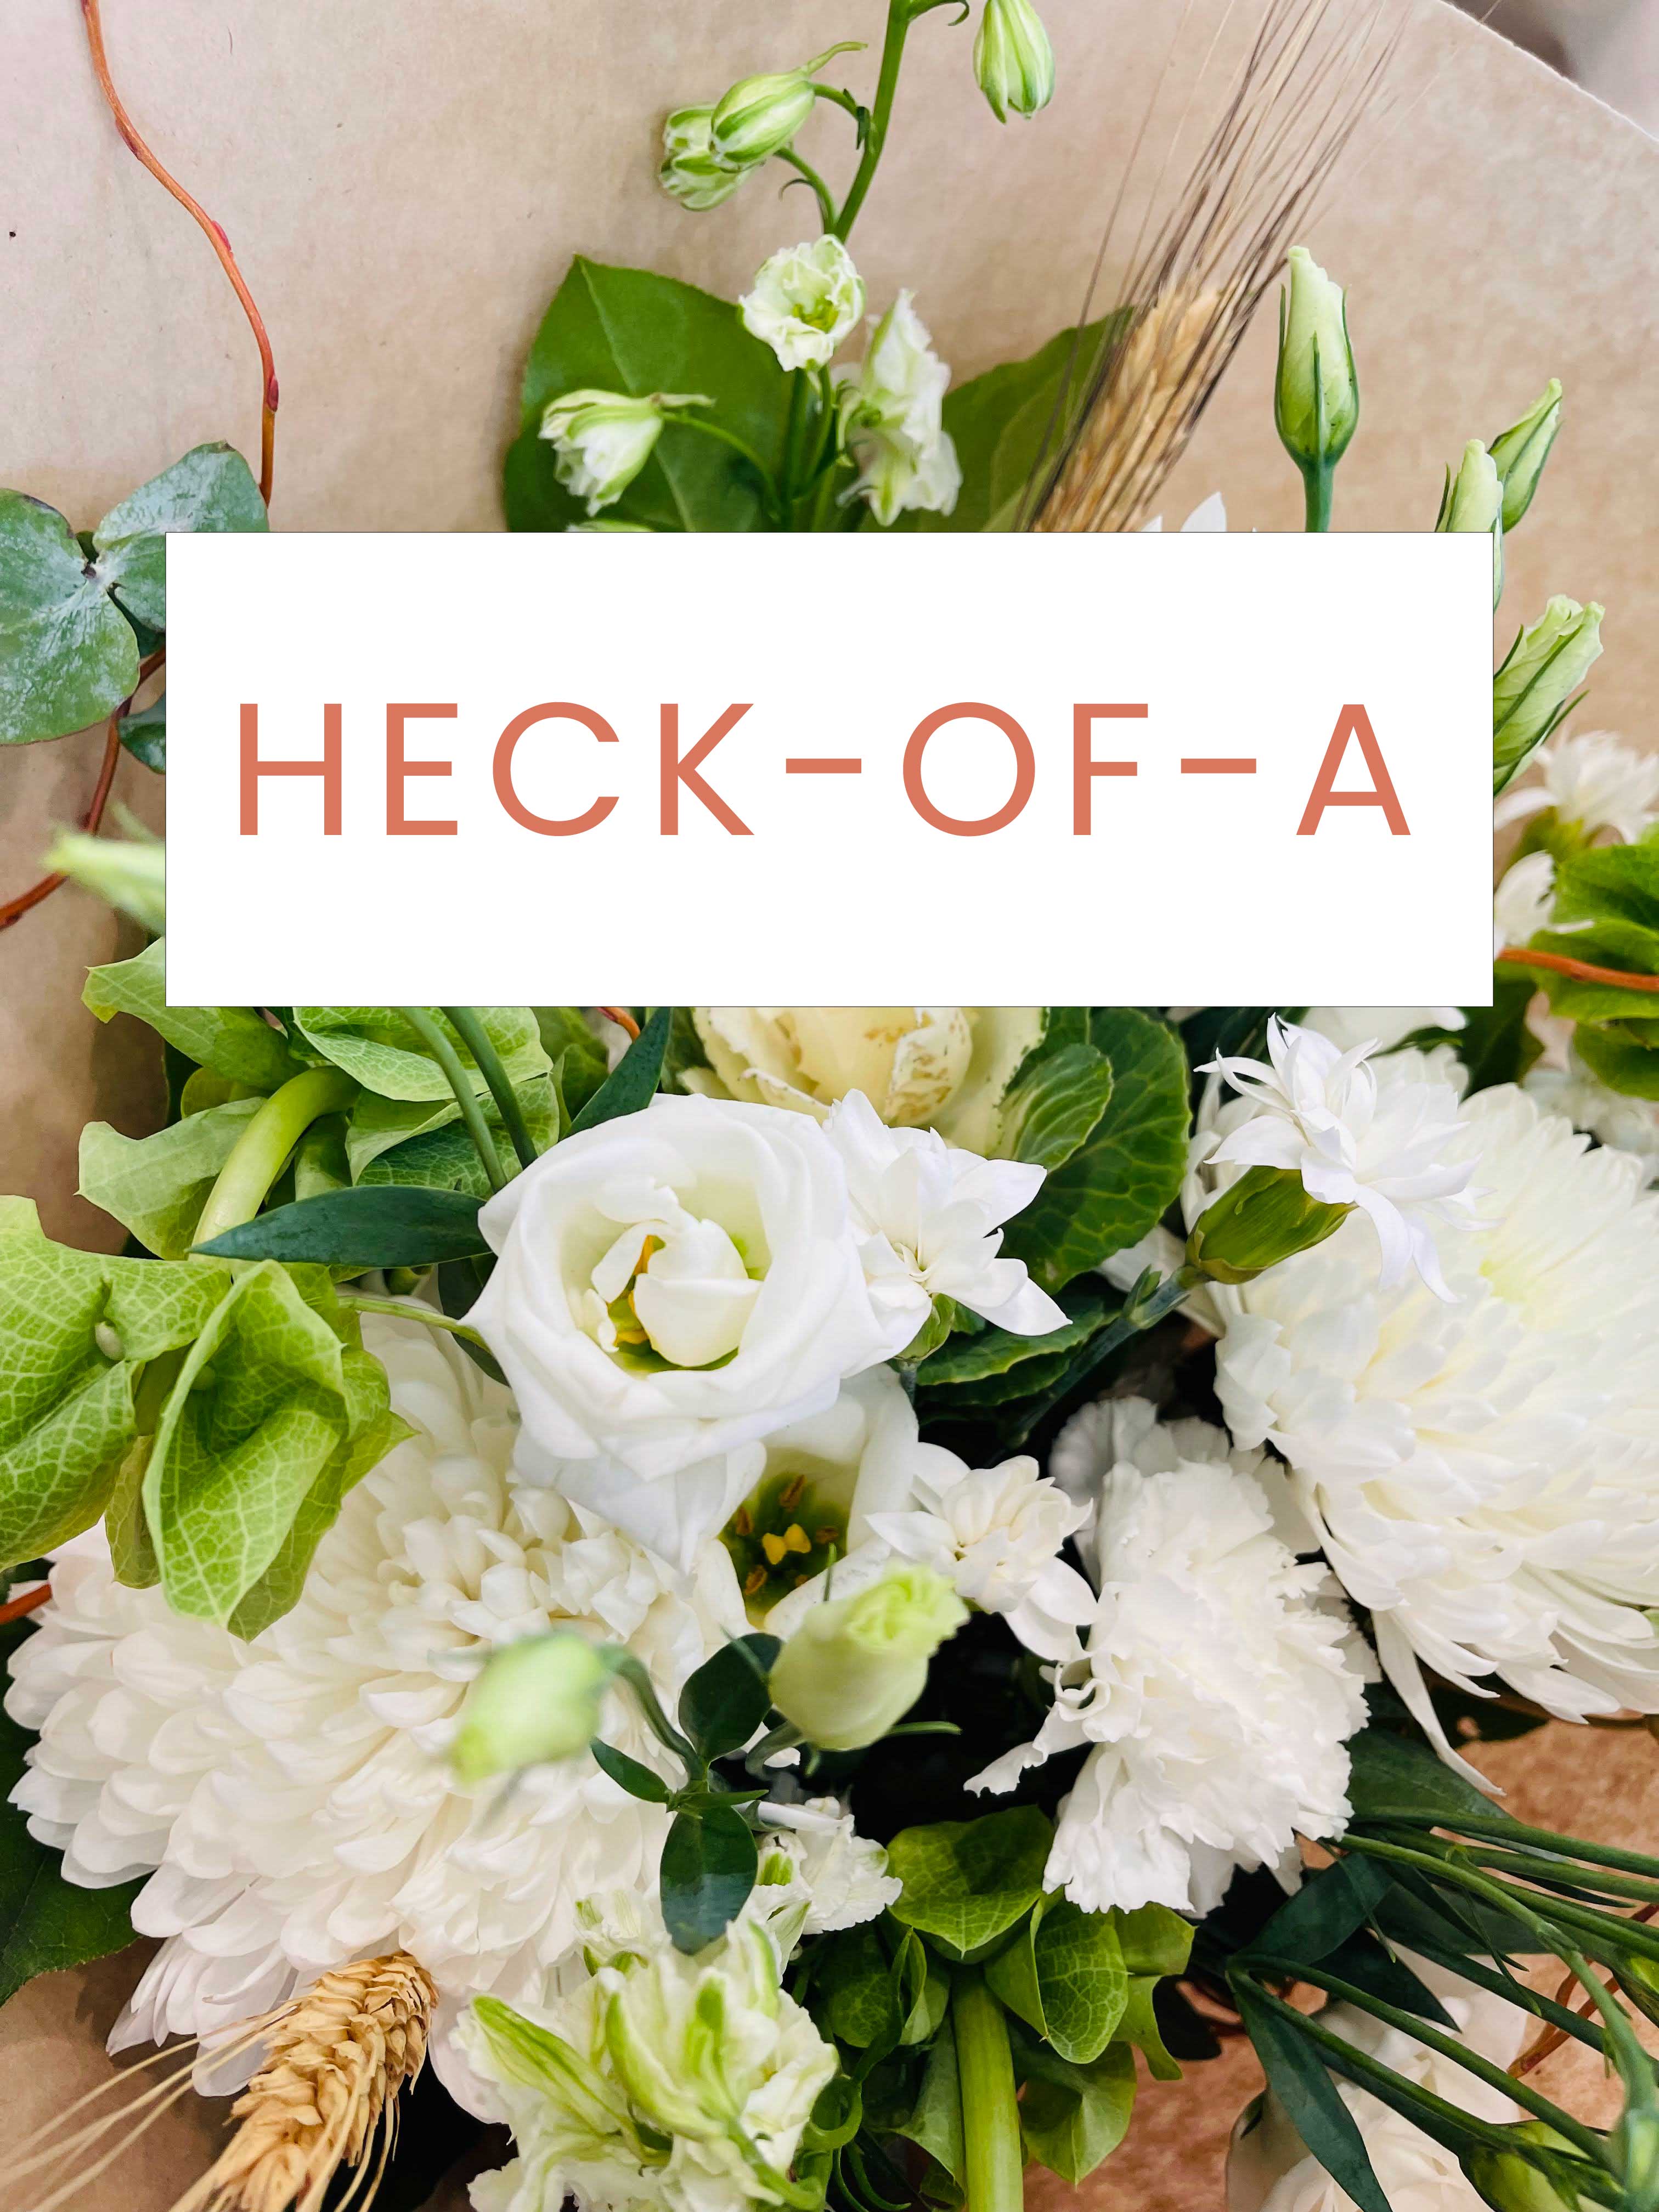 Heck-of-a-Hand-Tied Bouquet Subscription